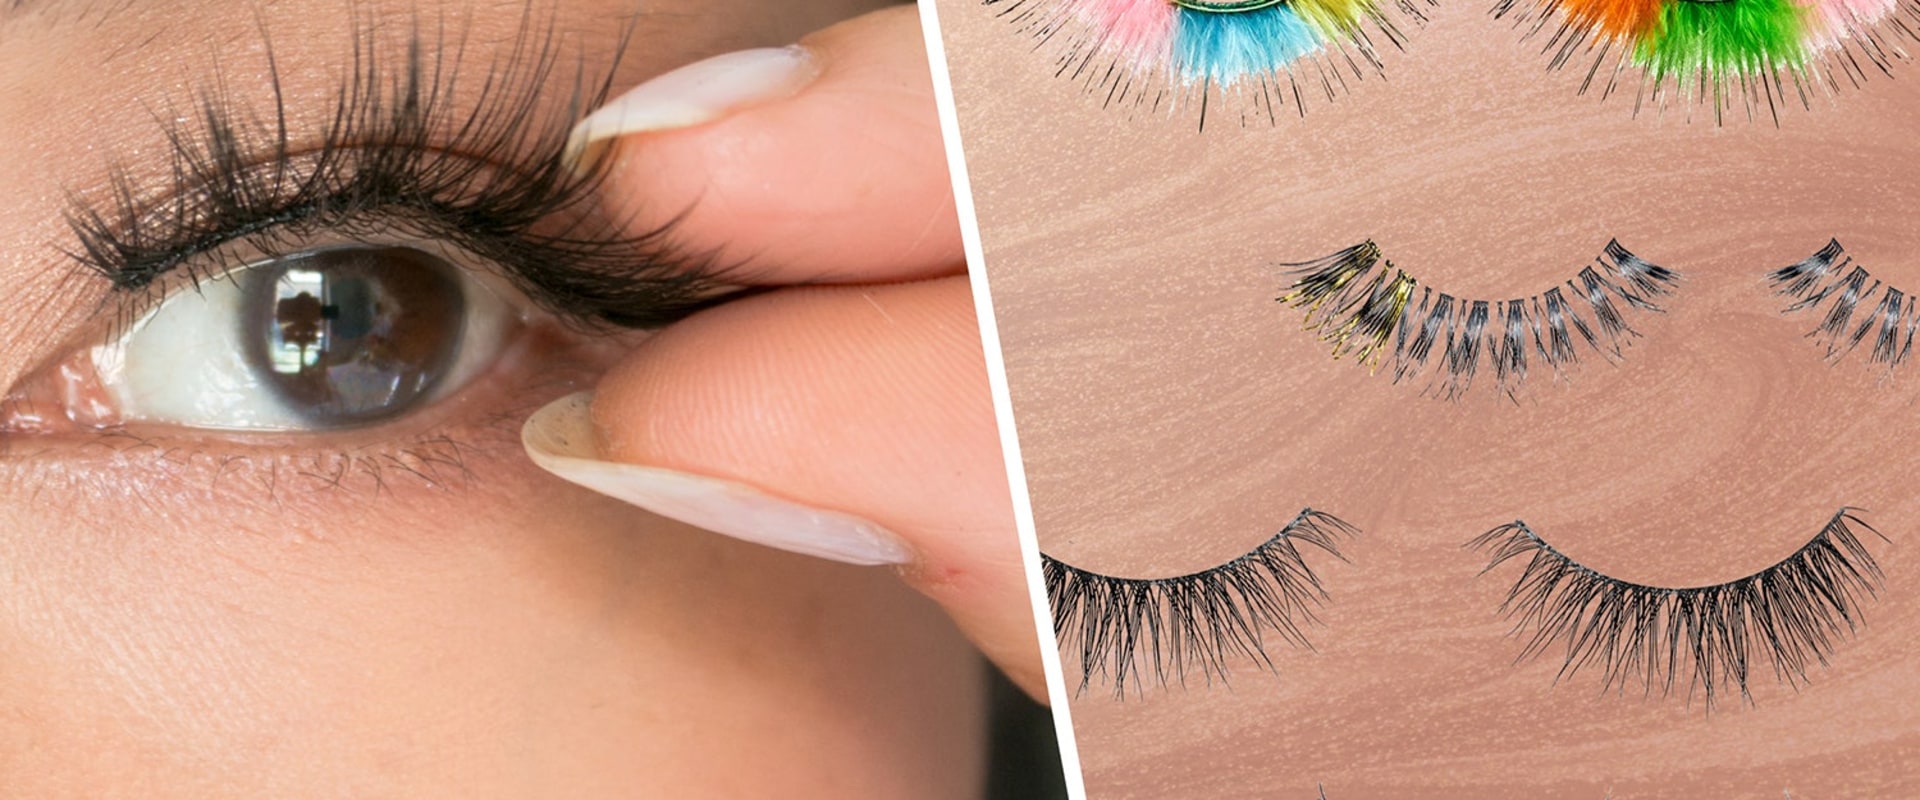 How to Get the Most Out of Your Eyelash Fillers